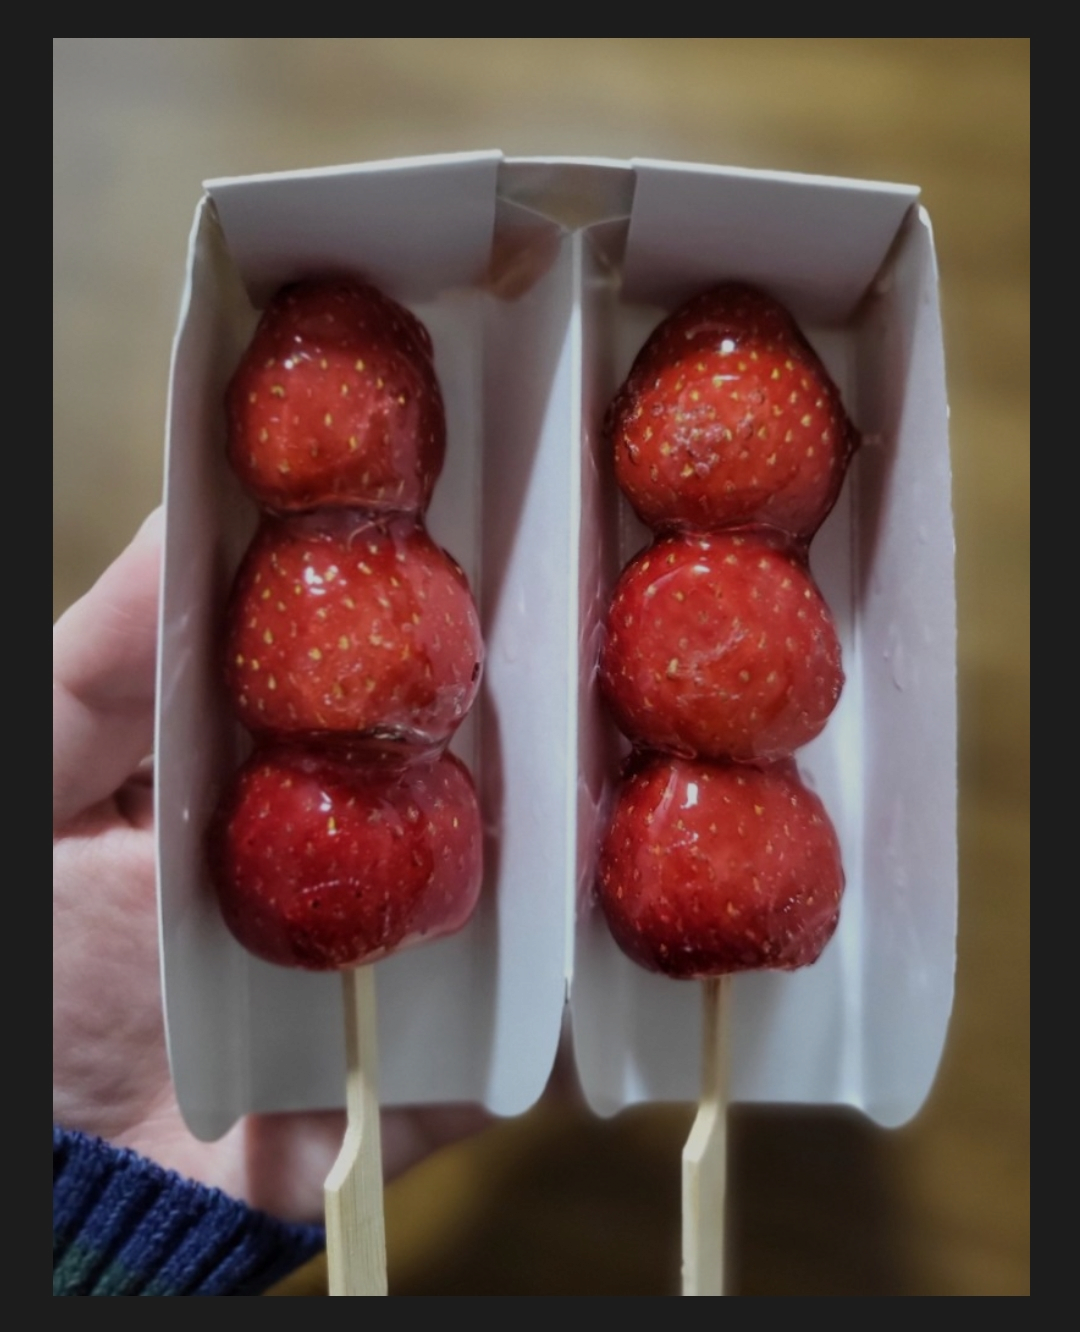 Strawberry tanghulu that they sell at ice cream discount stores